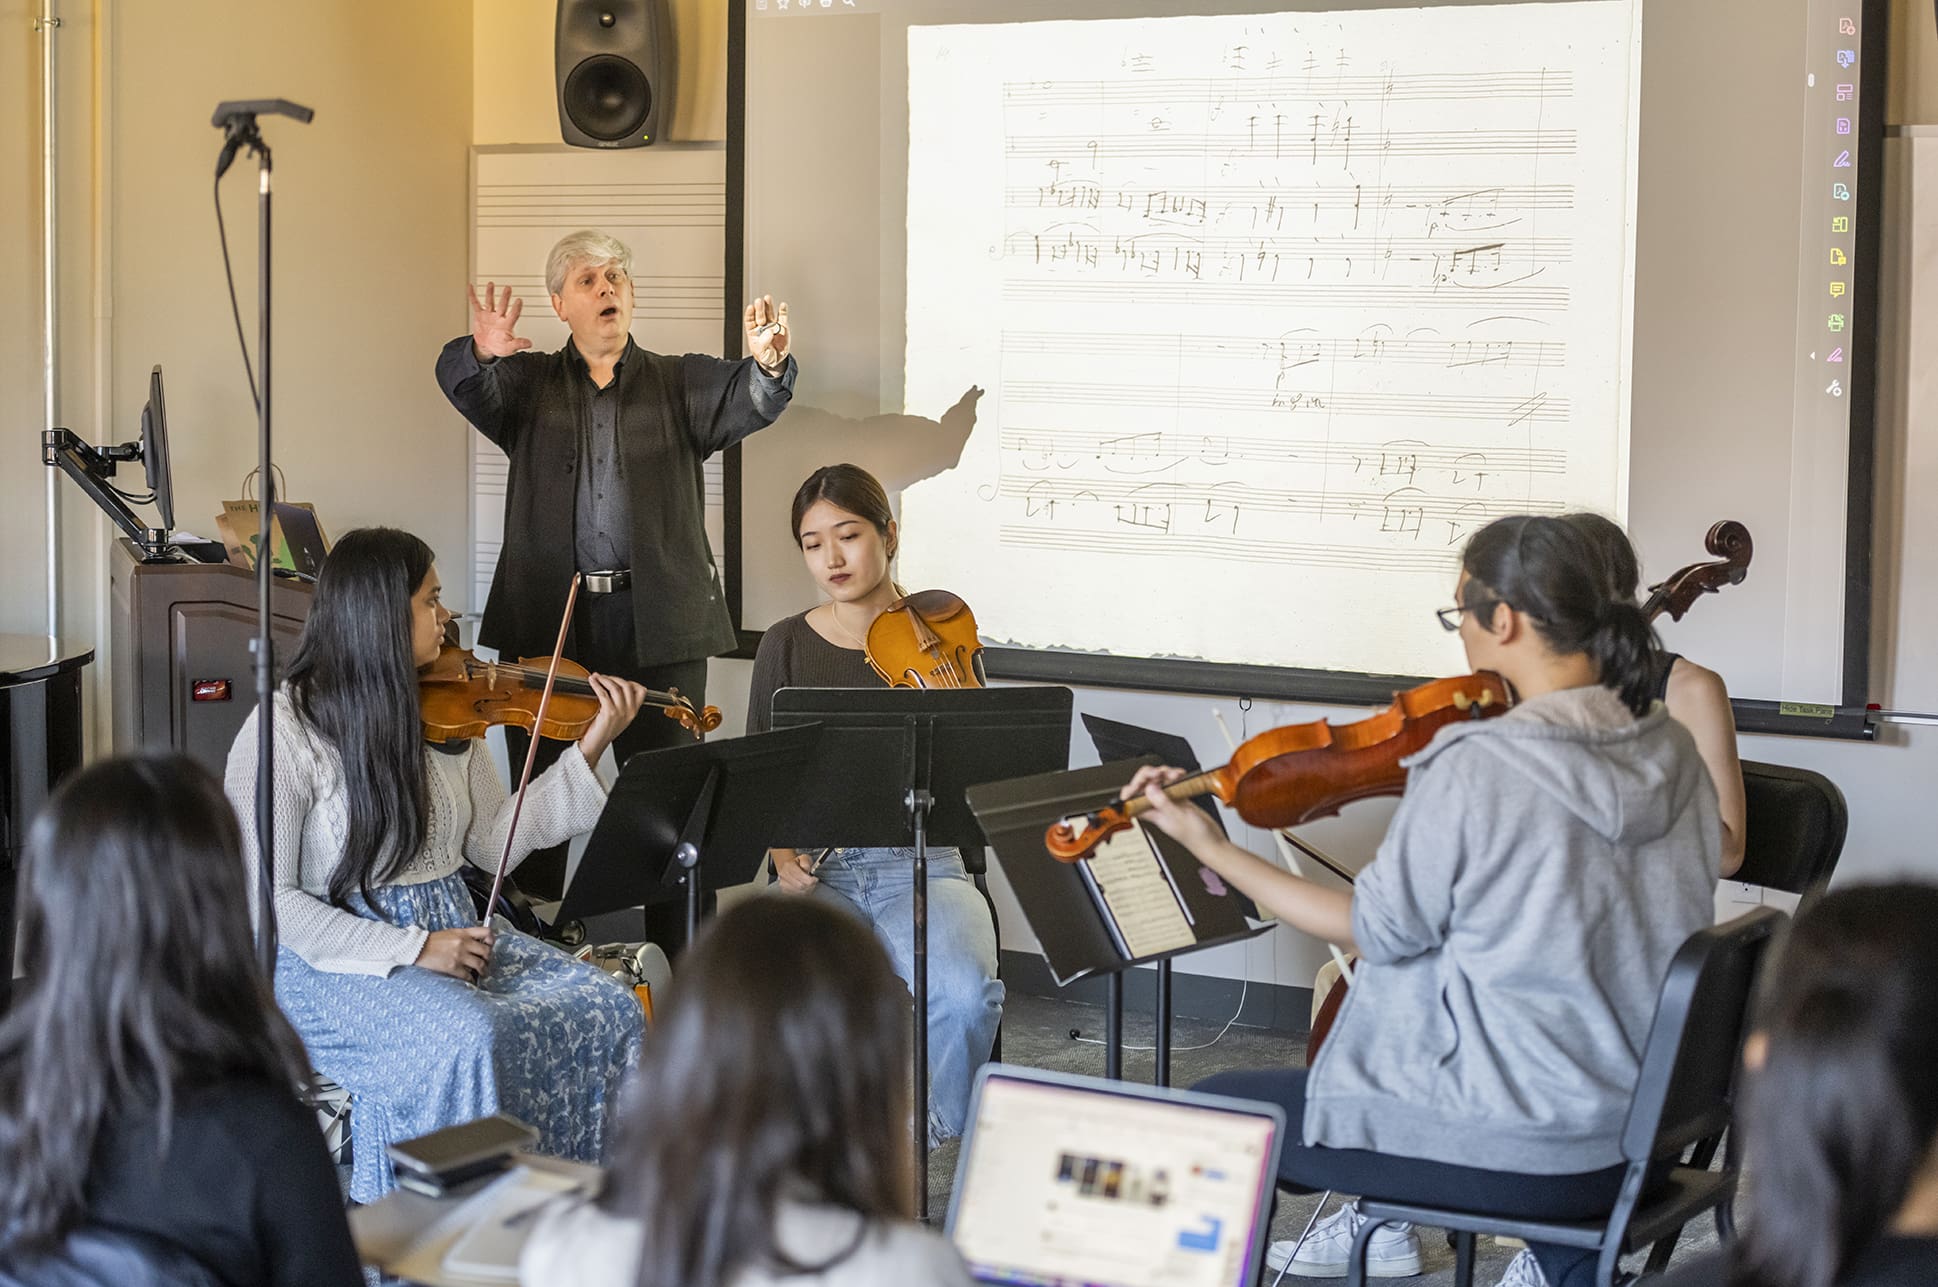 NEC faculty member Nick Kitchen teaching a class of students holding violins.